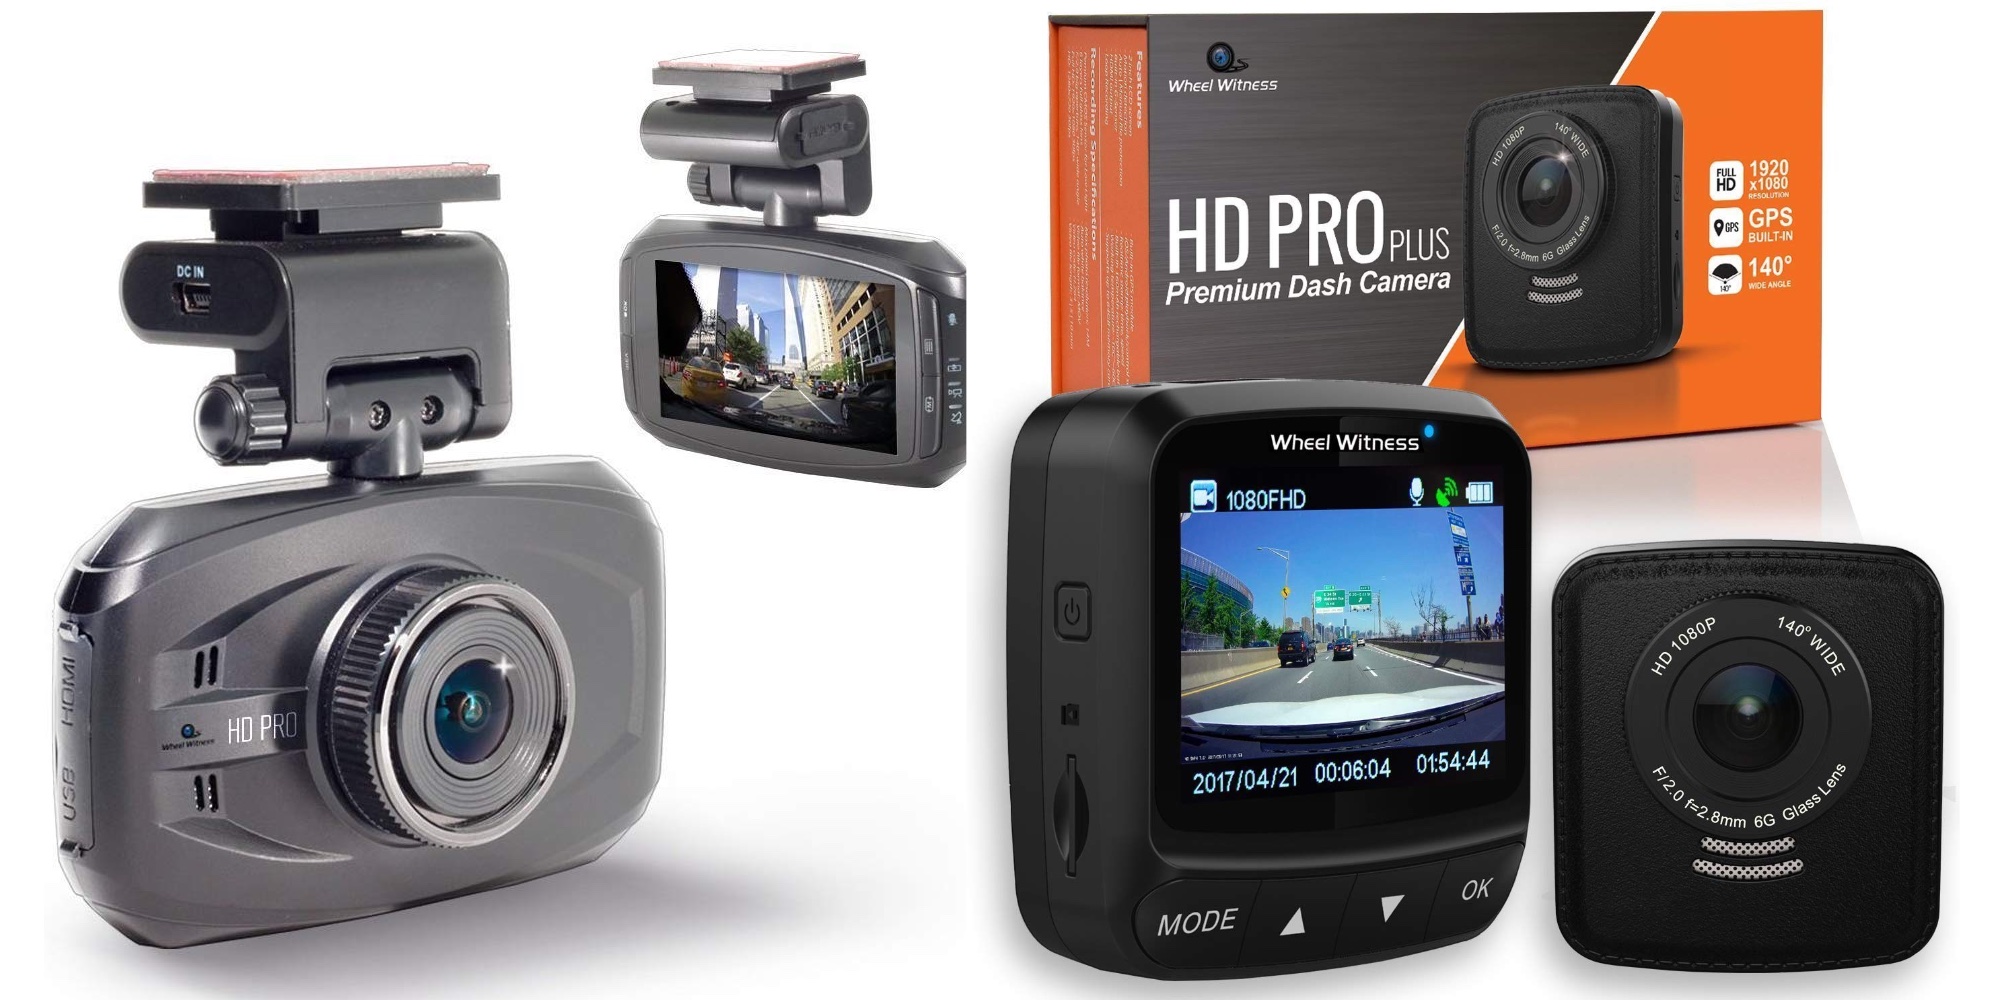 Dashboard Camera Review: The Wheel Witness HD PRO Premium